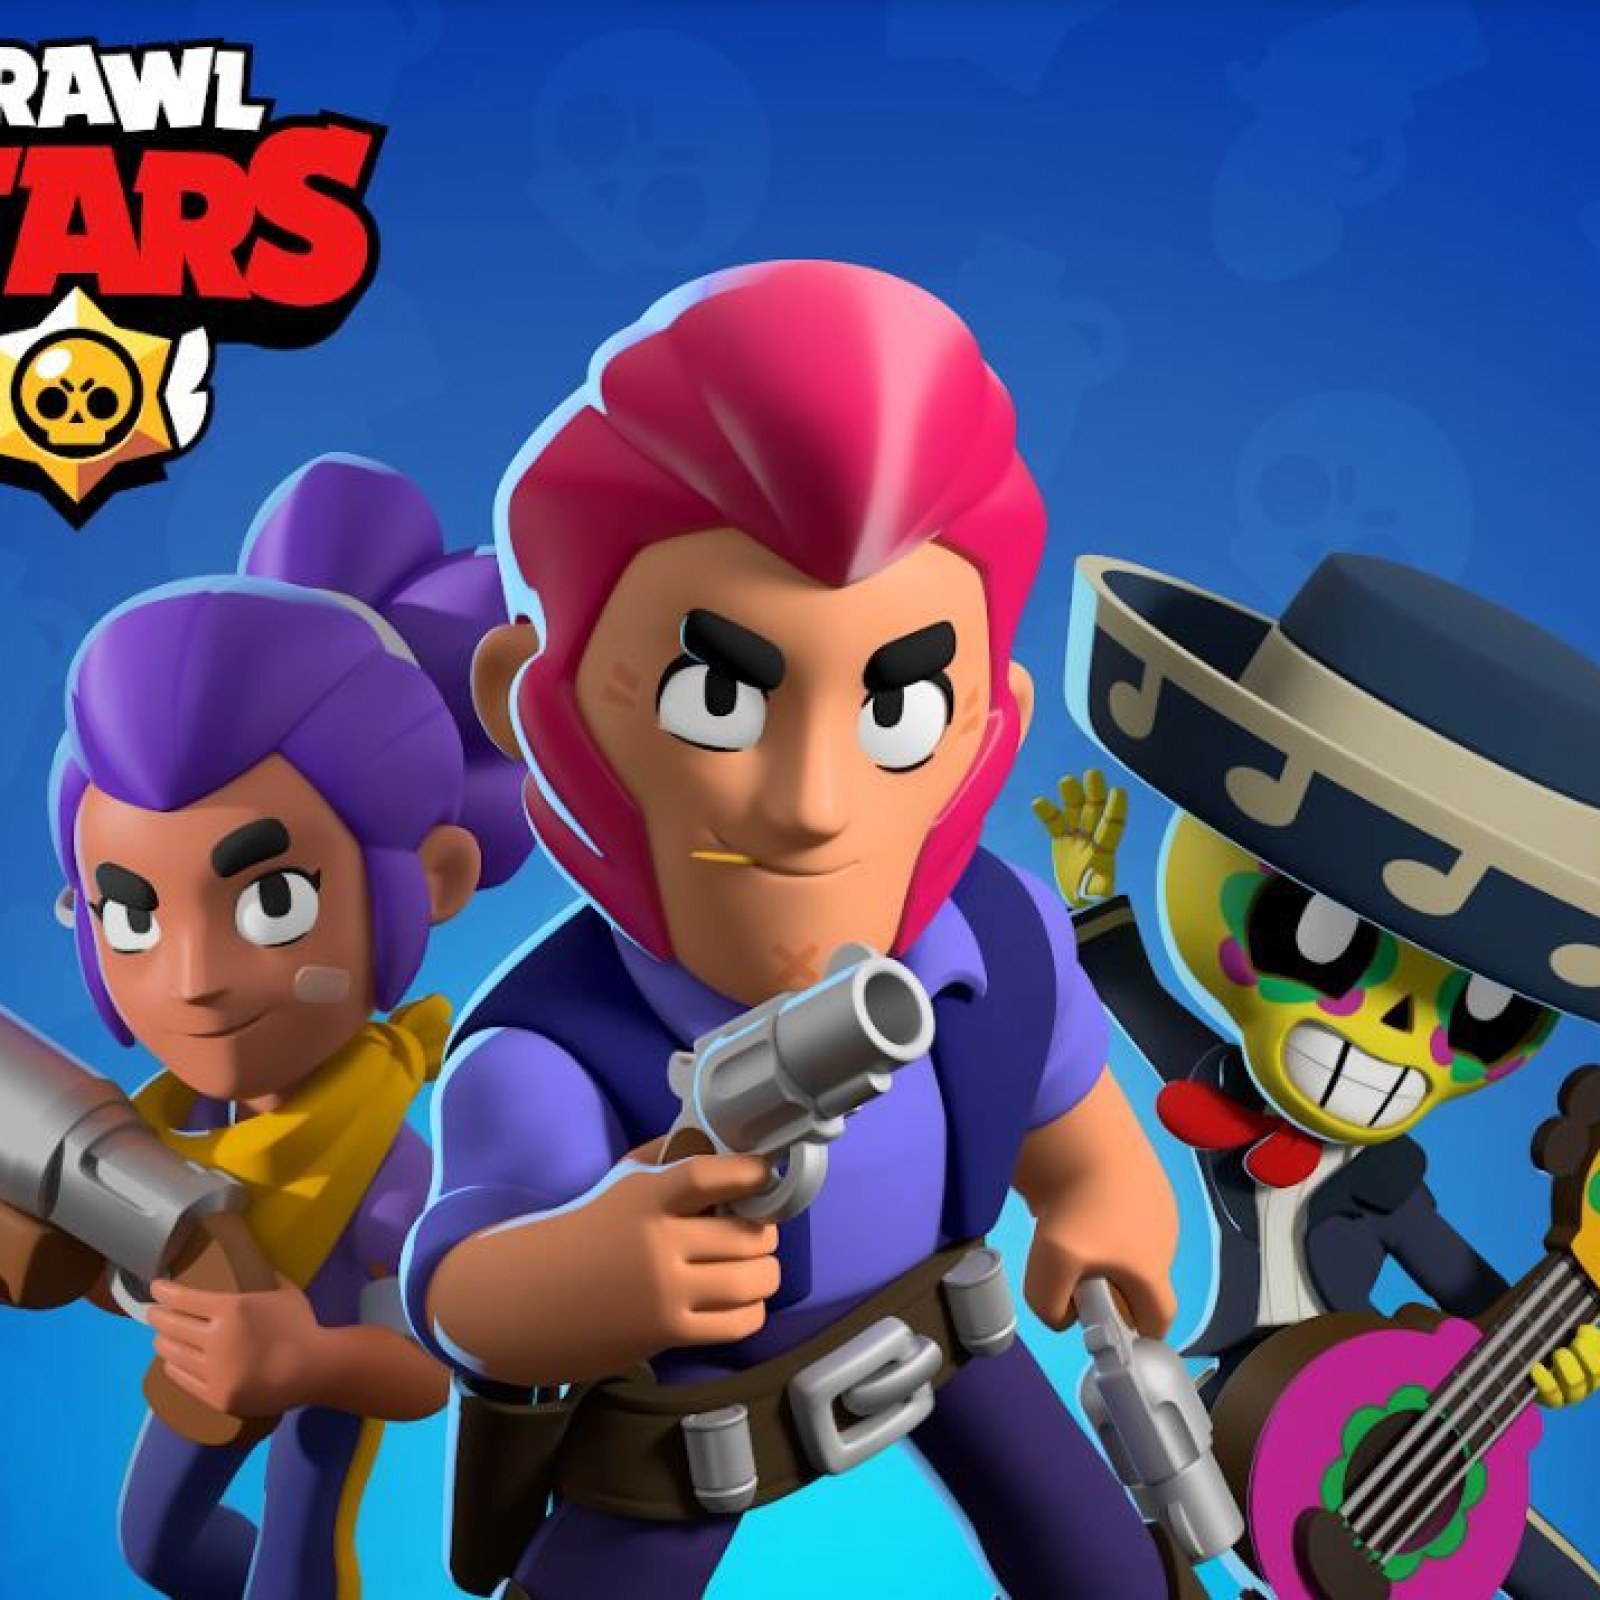 Brawl Stars Tips And Tricks Guide Farm Trophies Earn Brawlers And Unlock Wizard Barley - can you lose trophies in brawl stars